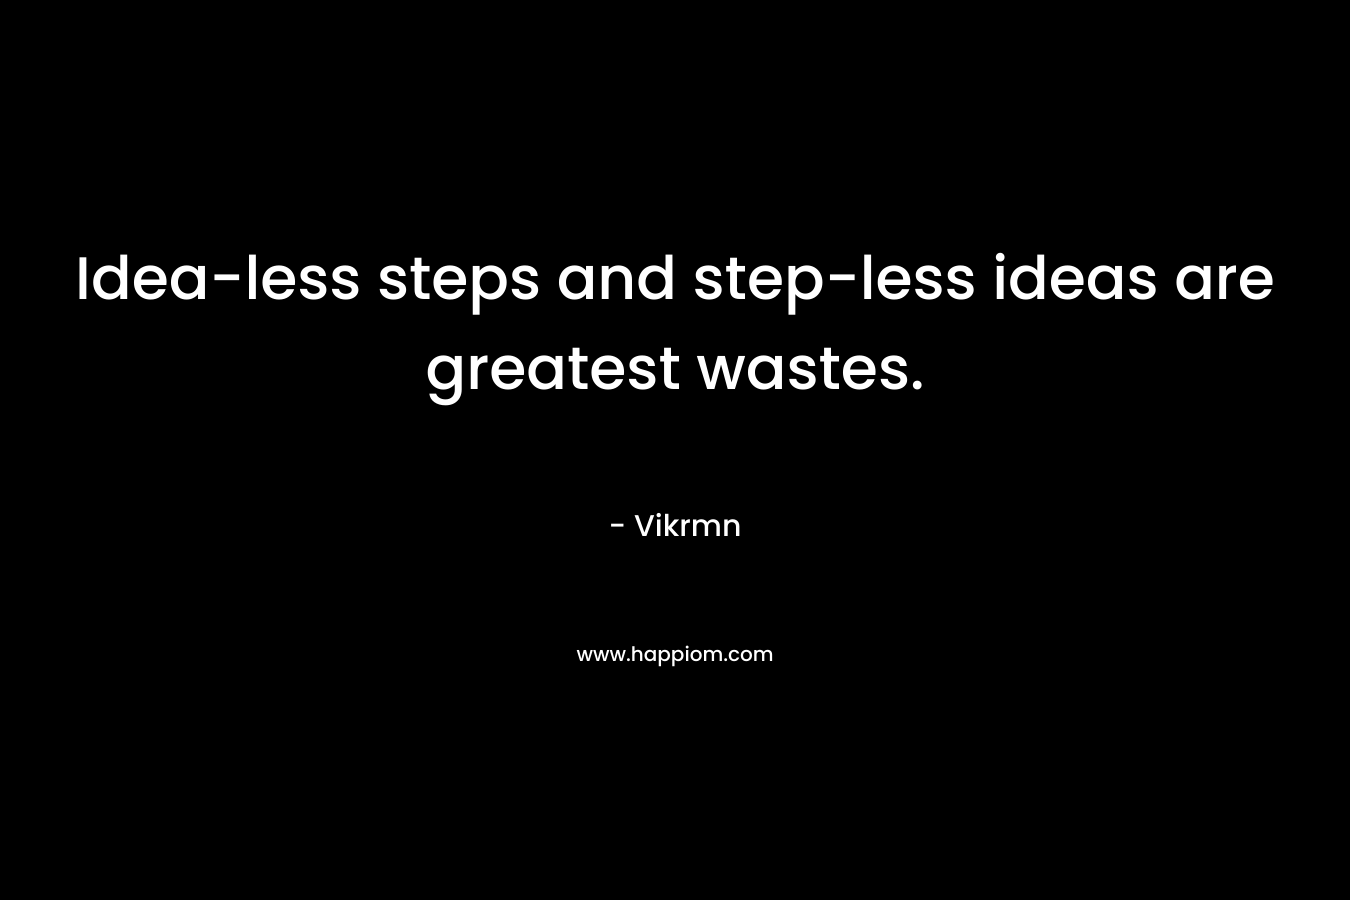 Idea-less steps and step-less ideas are greatest wastes. – Vikrmn